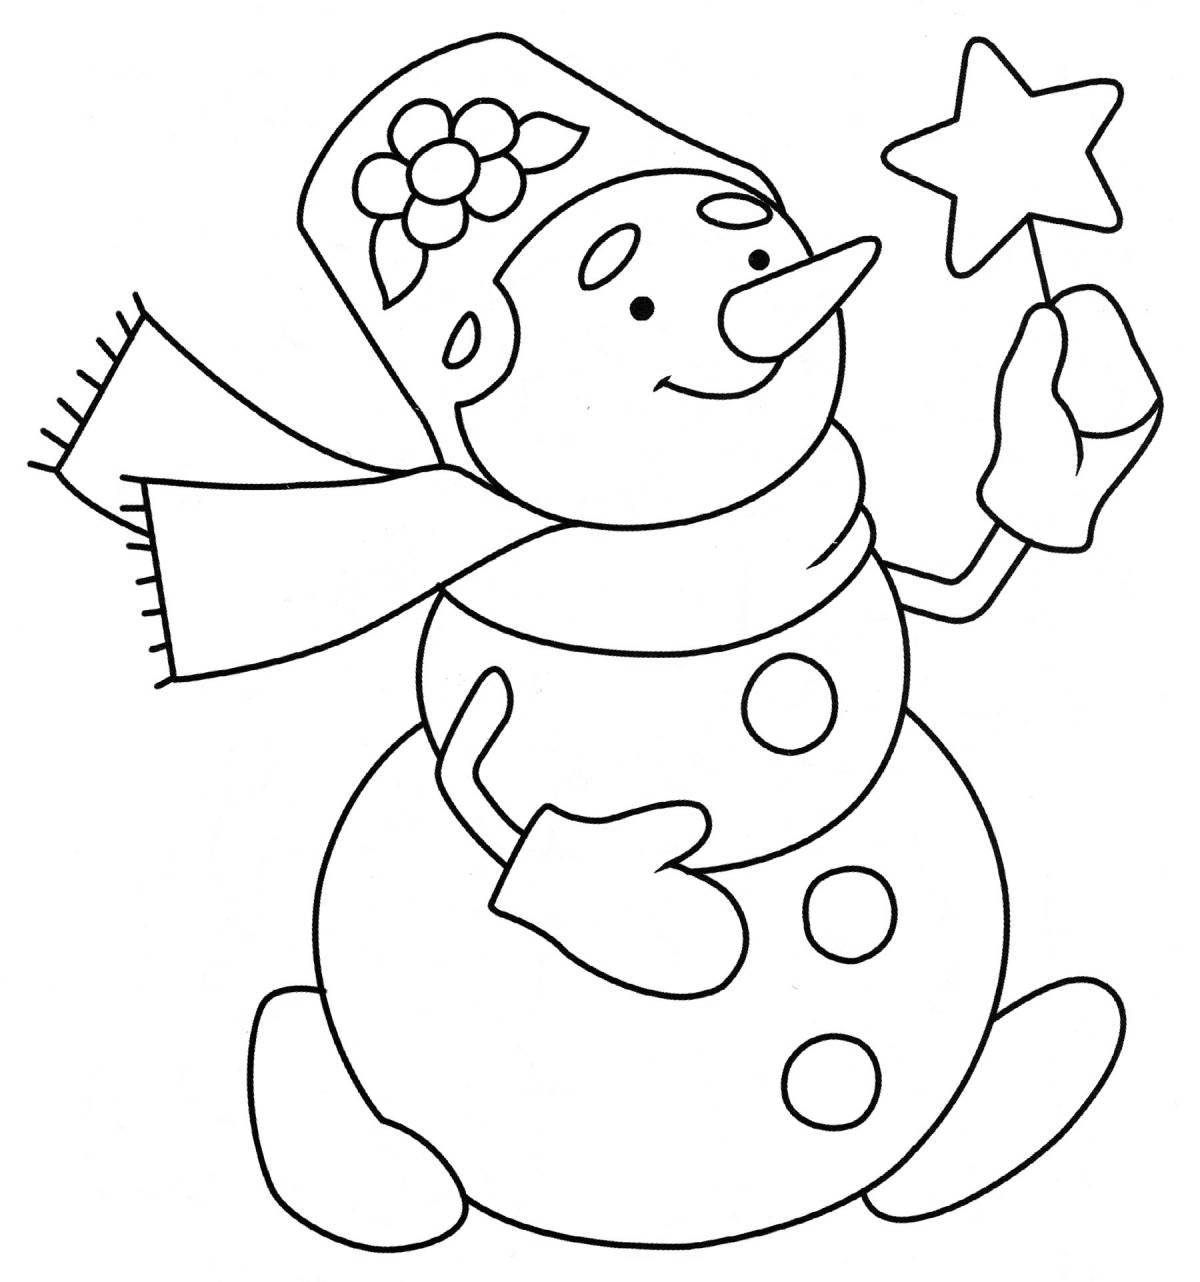 Holiday coloring snowman for children 4-5 years old